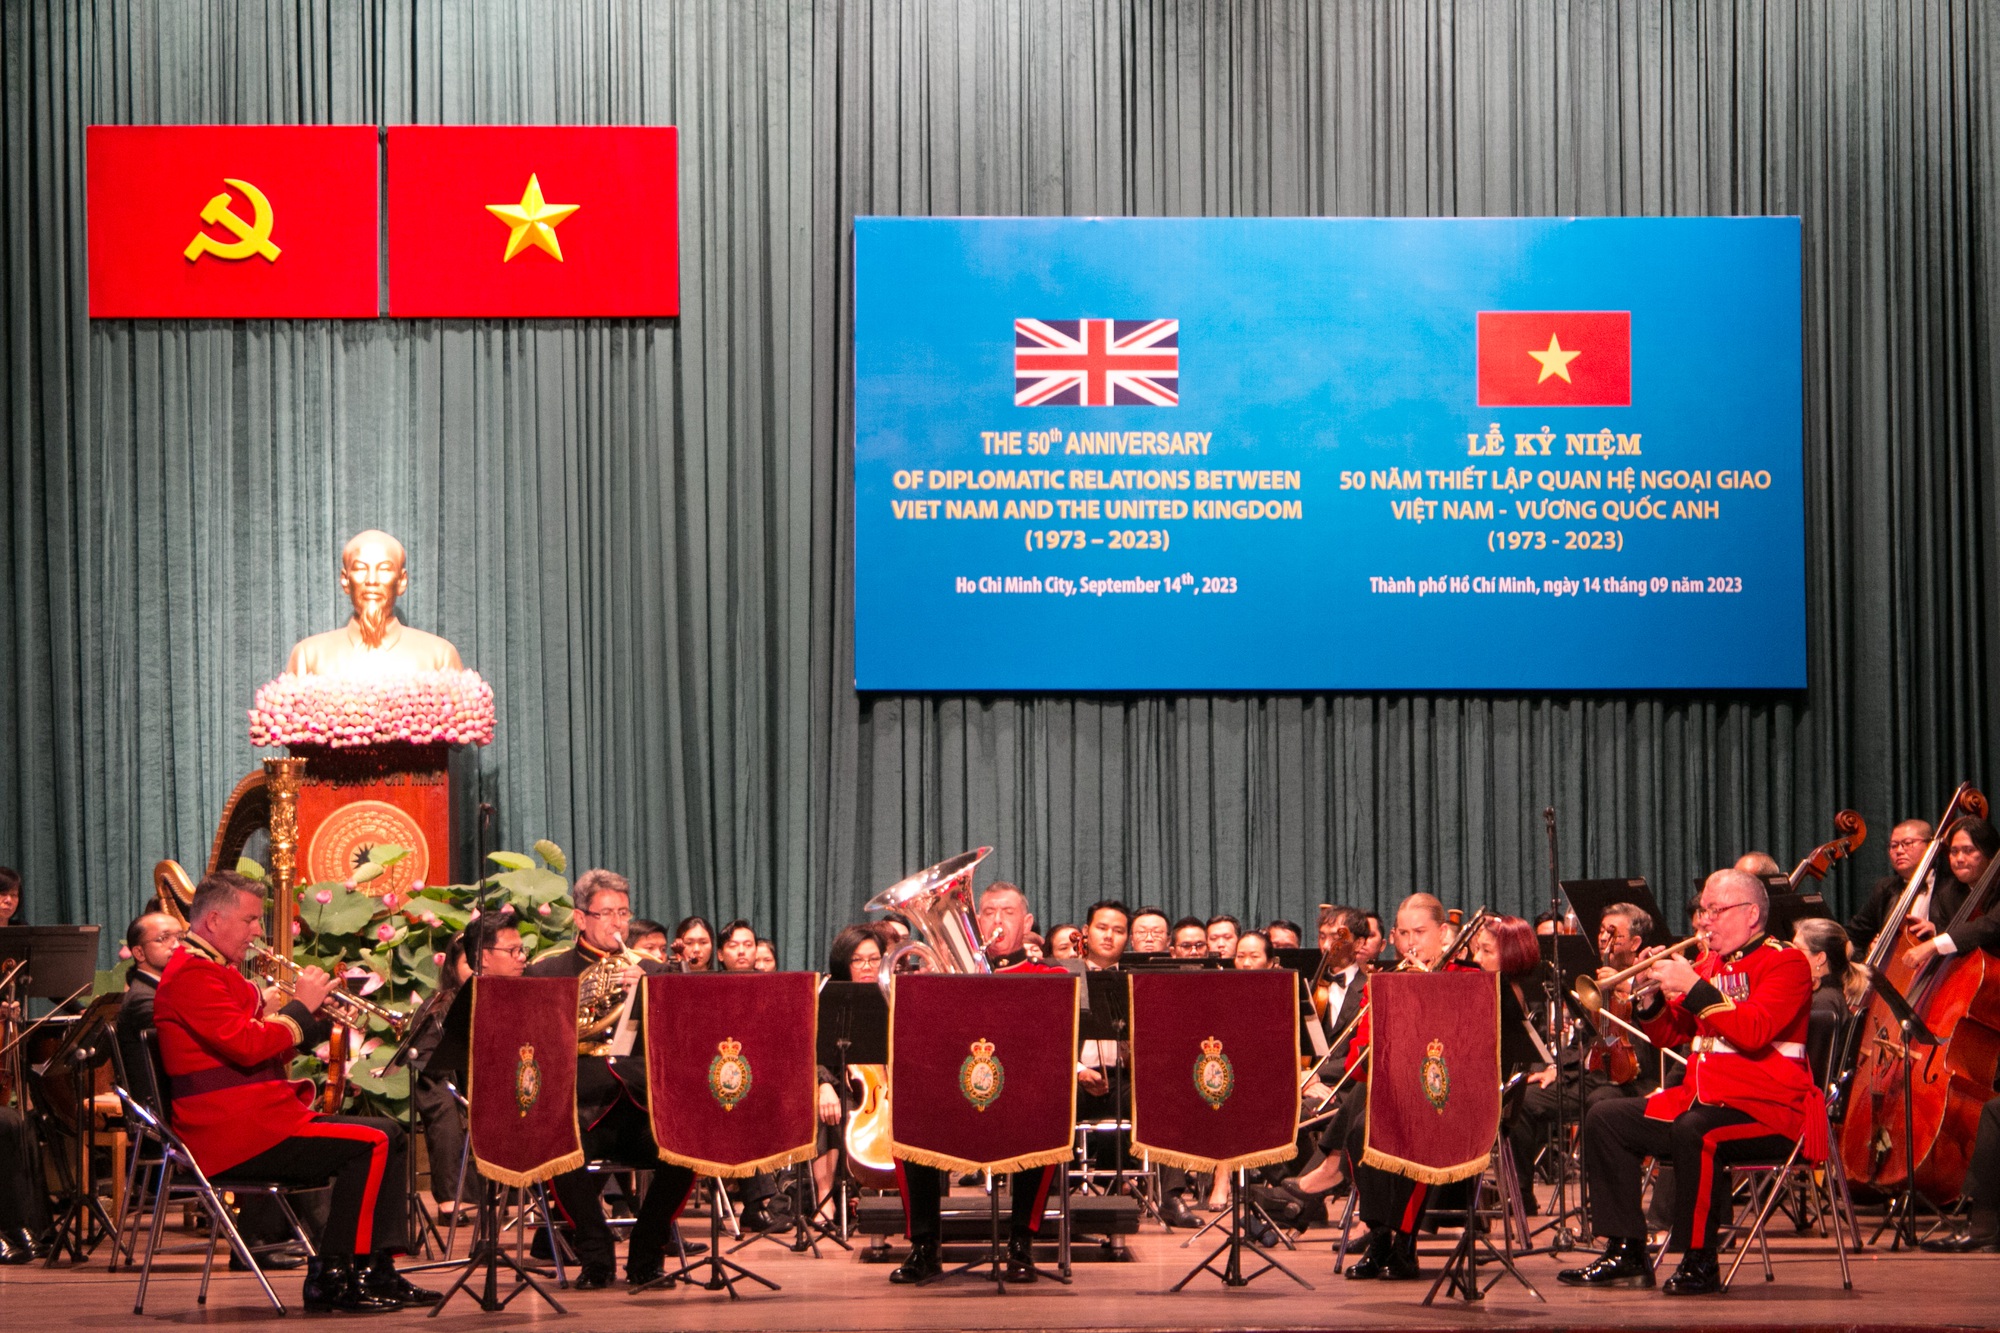 Ho Chi Minh City celebrates the 50th anniversary of the establishment of diplomatic relations between Vietnam and the UK - Photo 7.